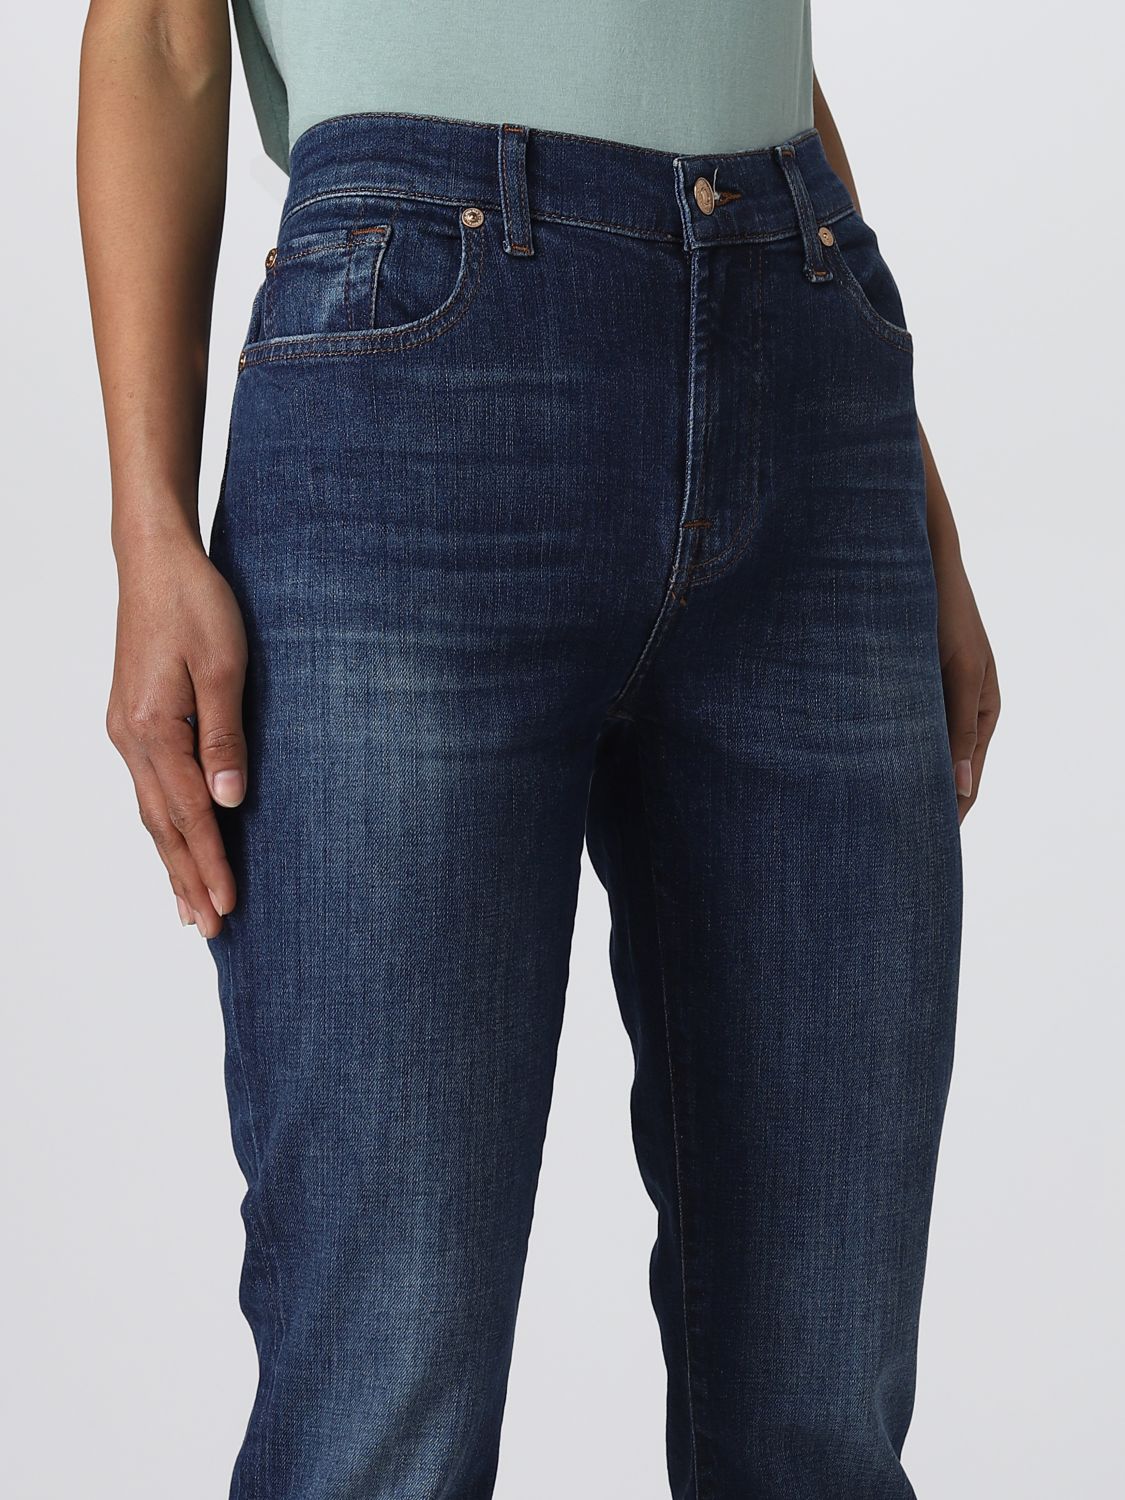 Trousers 7 For All Mankind: 7 For All Mankind trousers for women blue 3